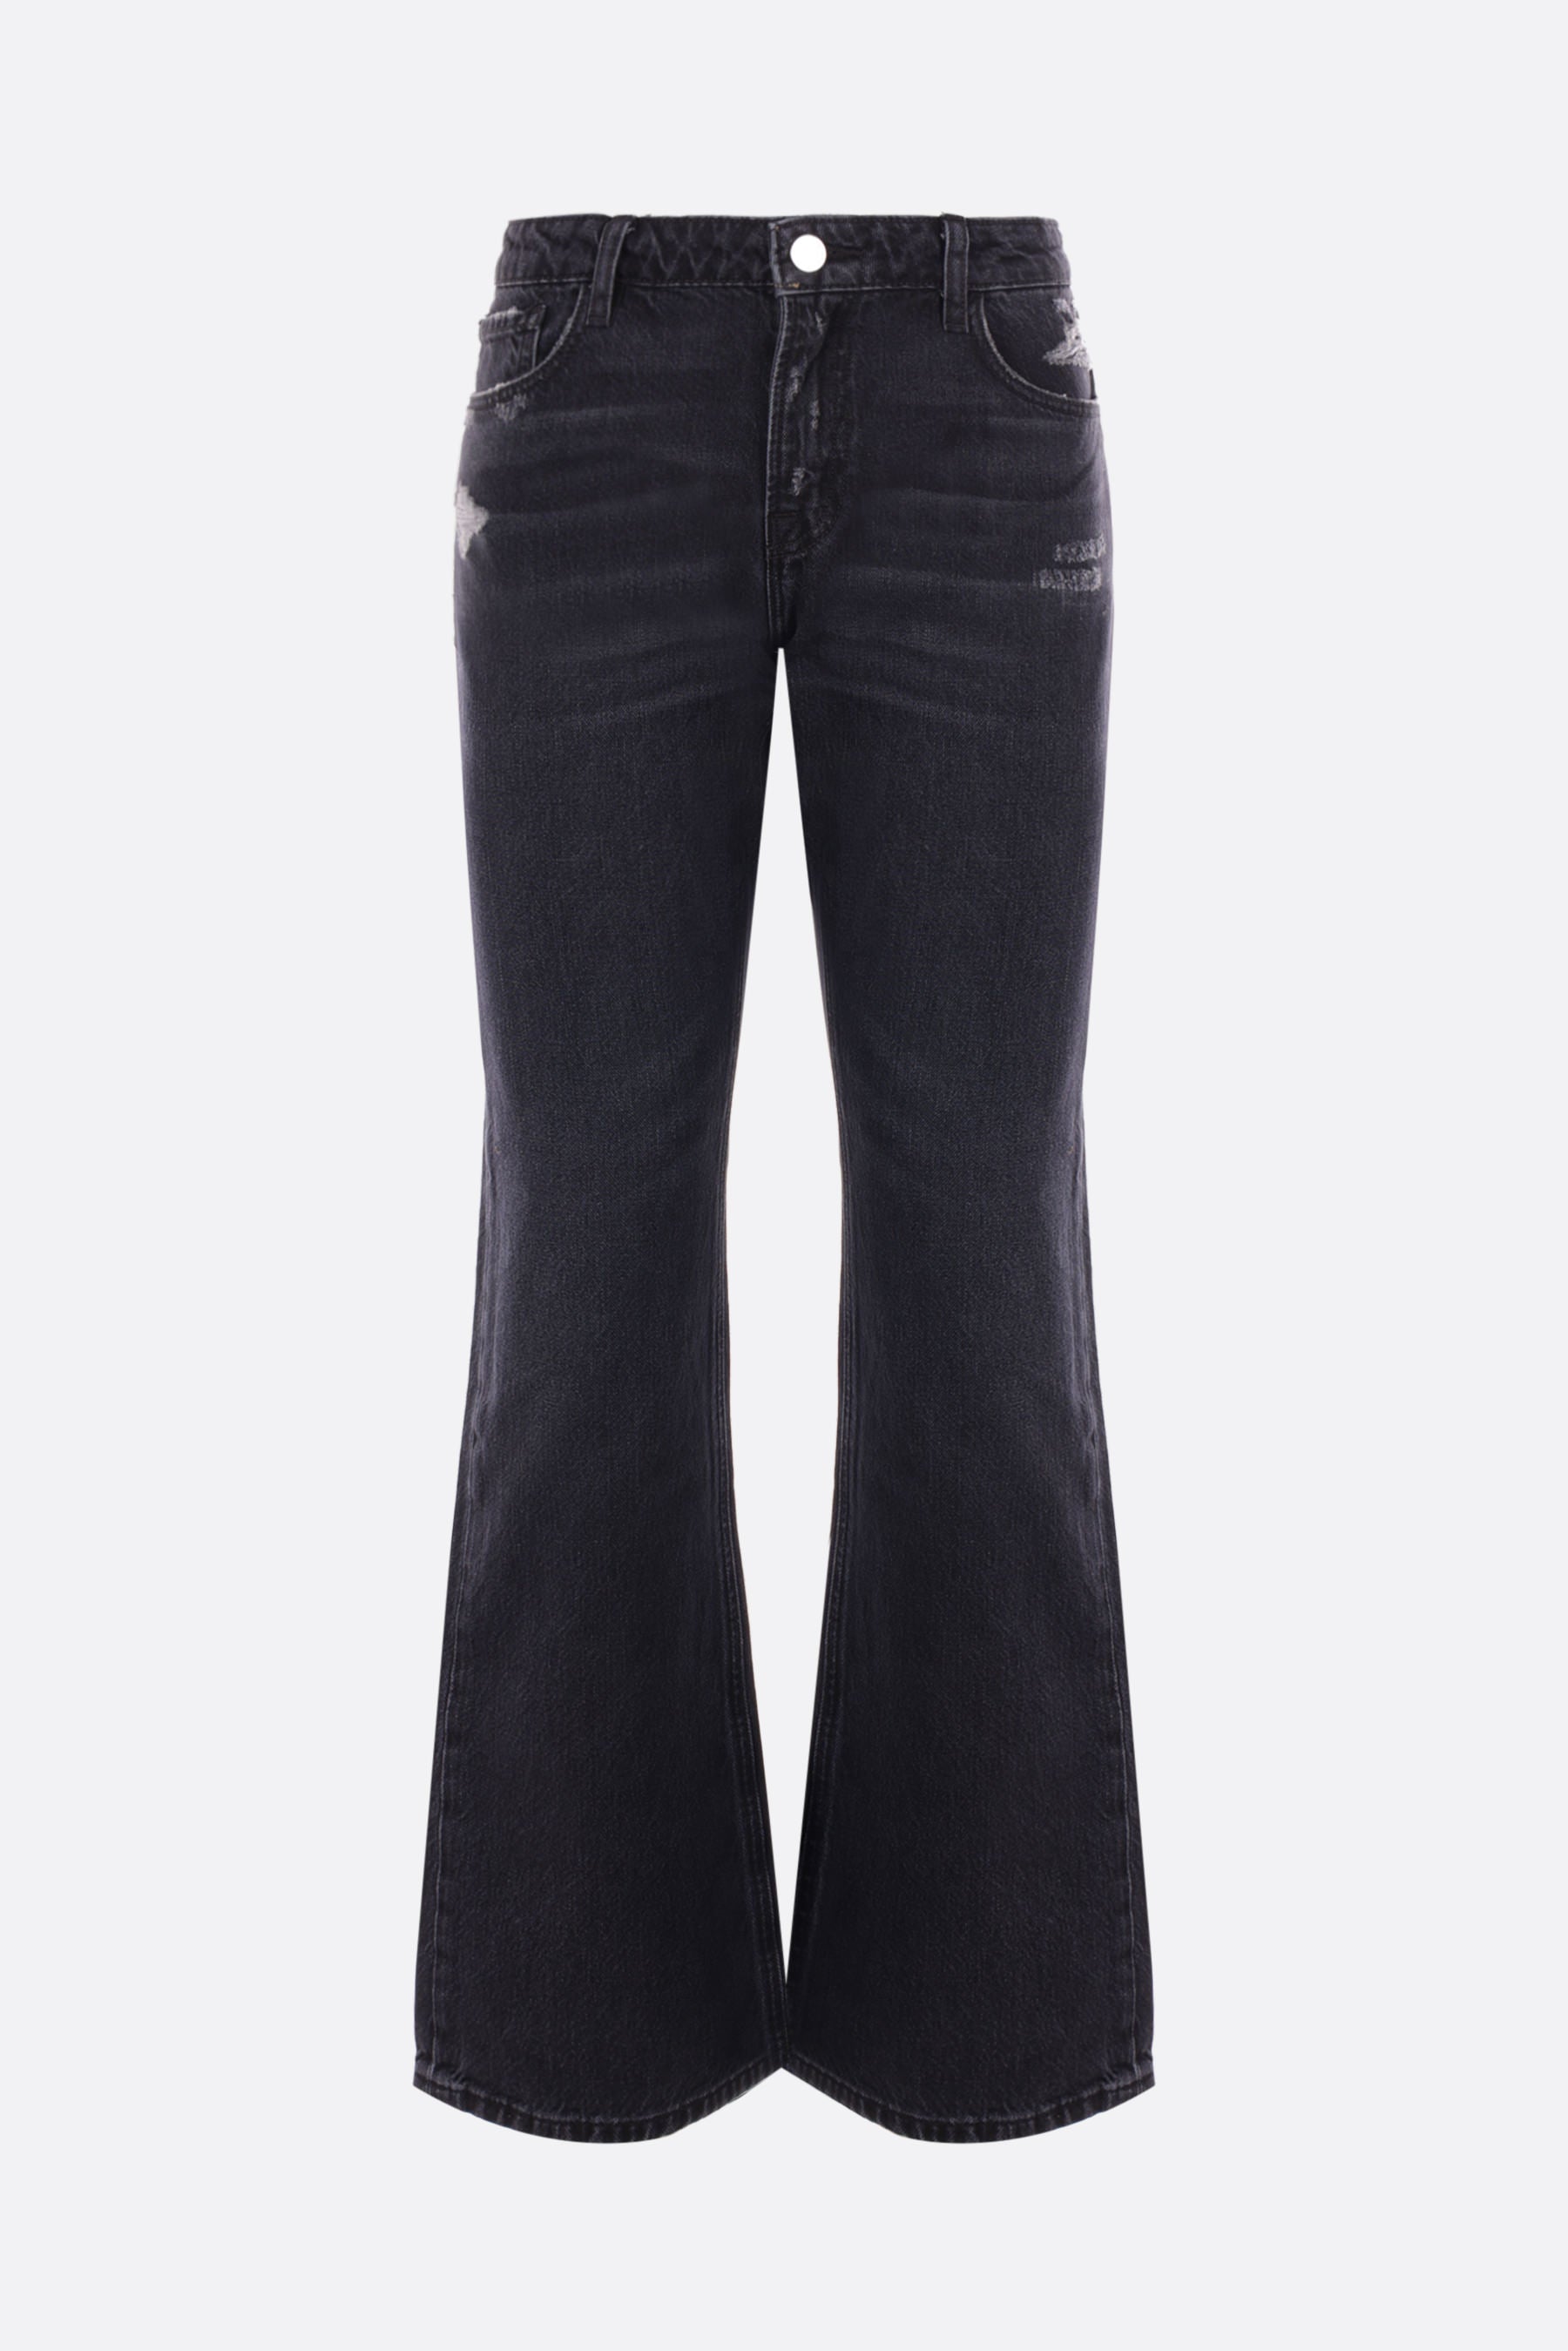 The Low Boot denim bootcut jeans